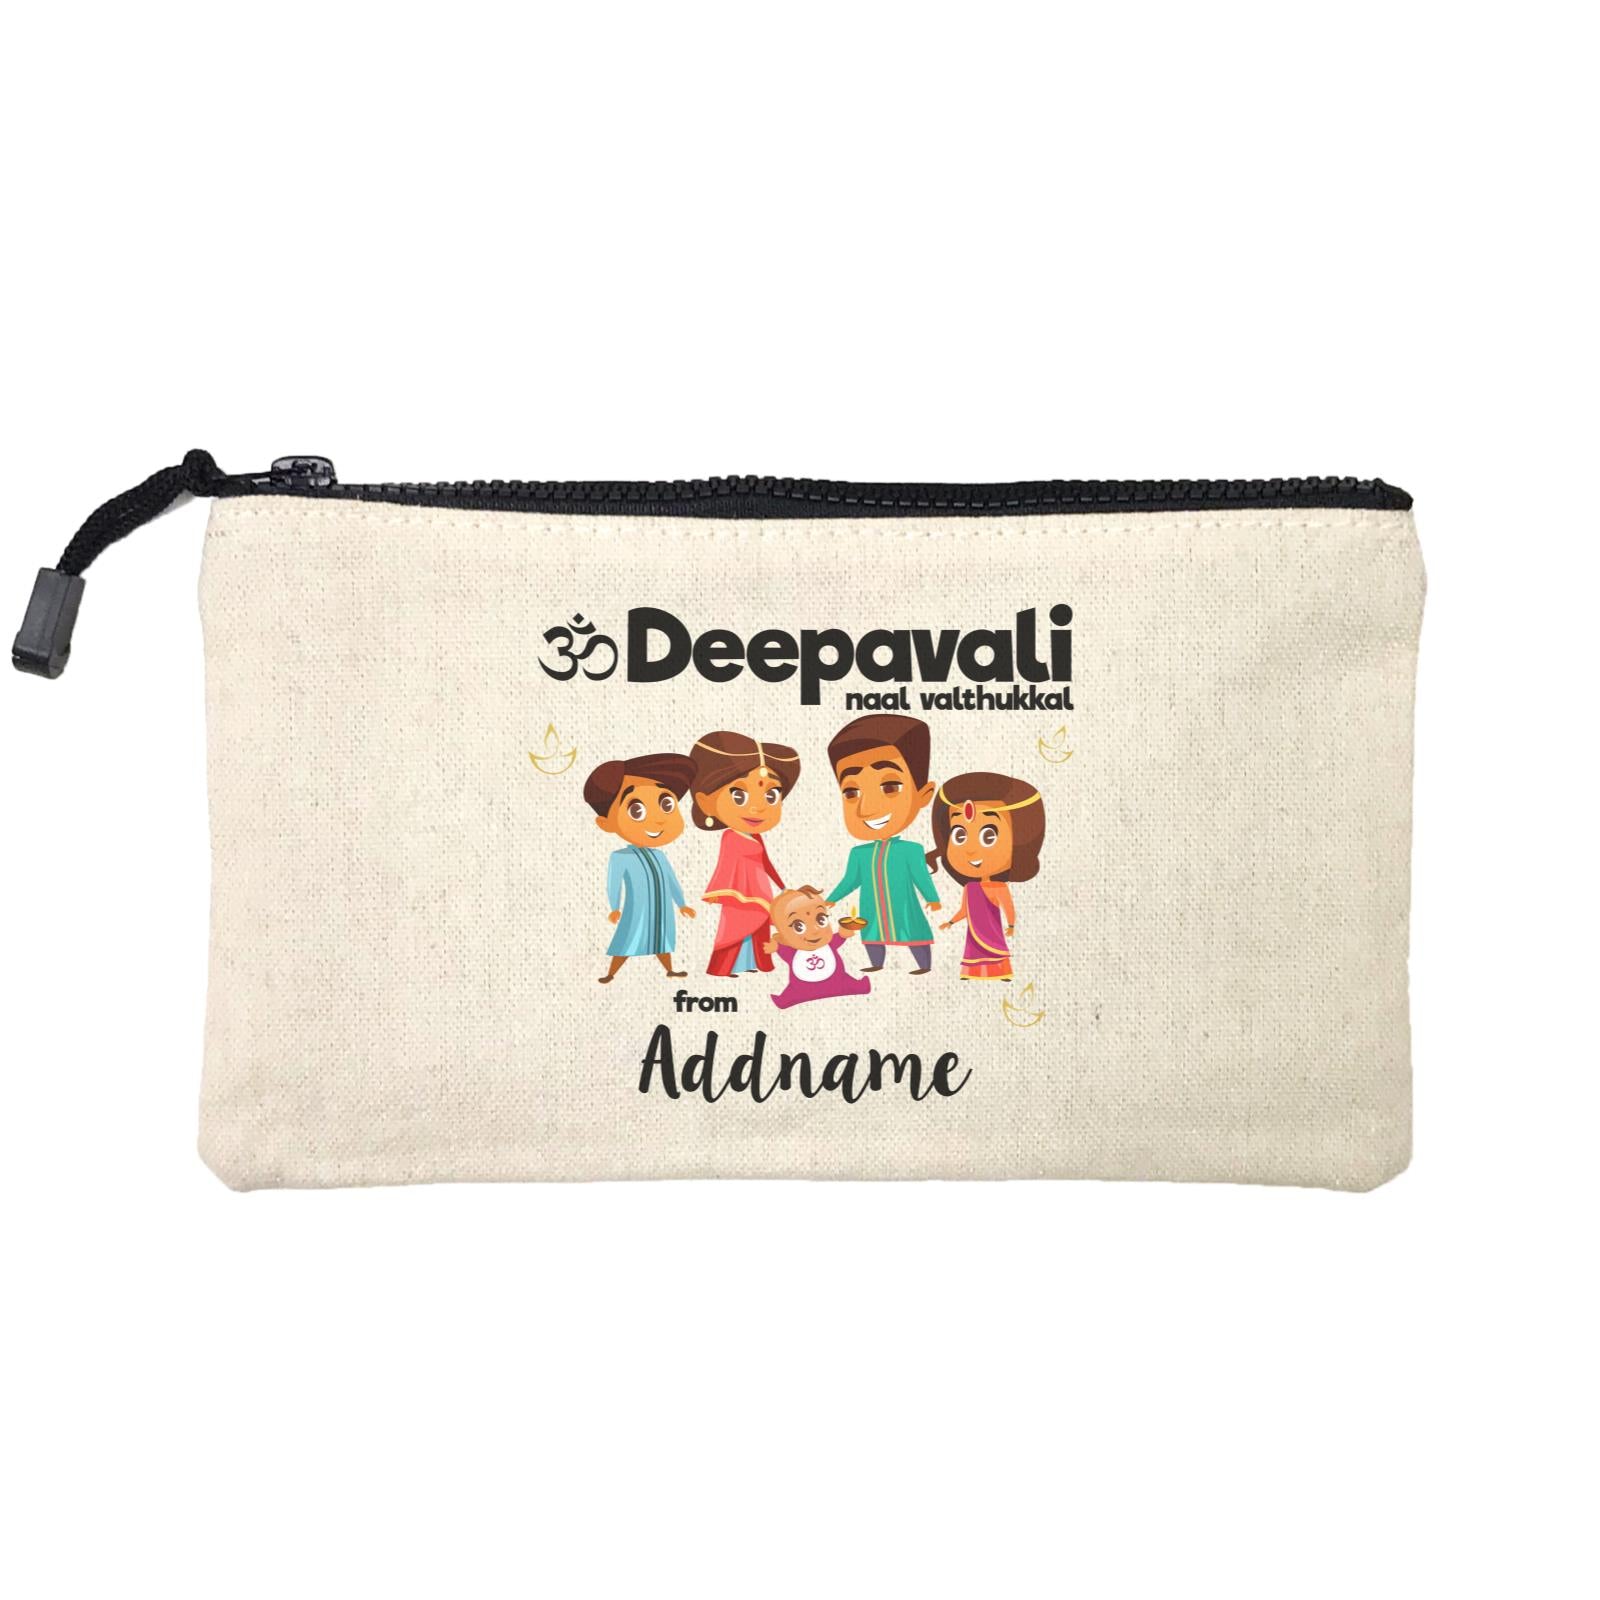 Cute Family Of Five OM Deepavali From Addname Mini Accessories Stationery Pouch